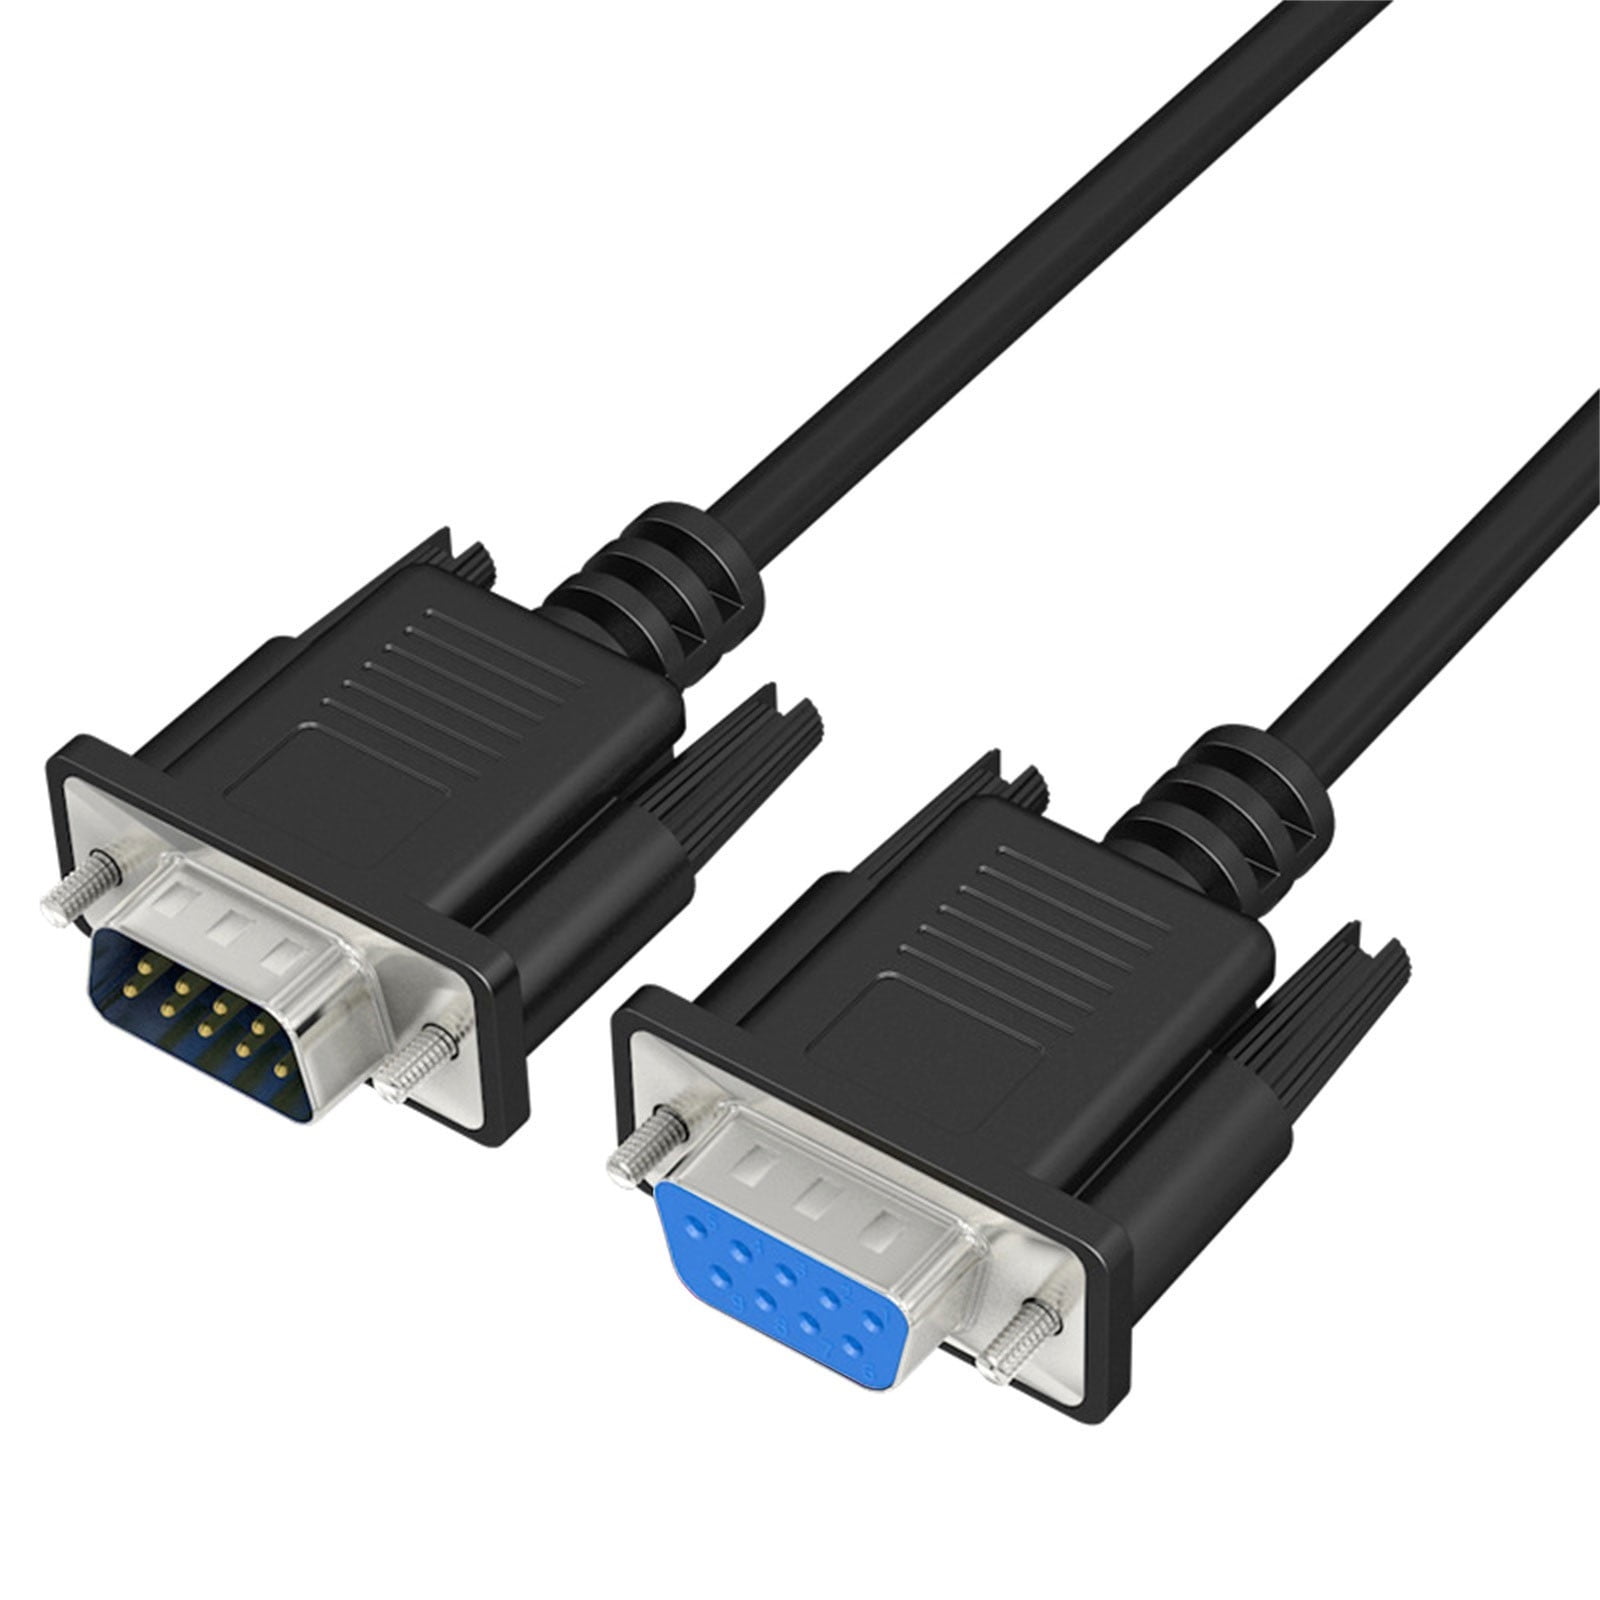 RS232 DB9 Straight Copper To Through Cable Serial HDMI cable HDMI Walmart.com